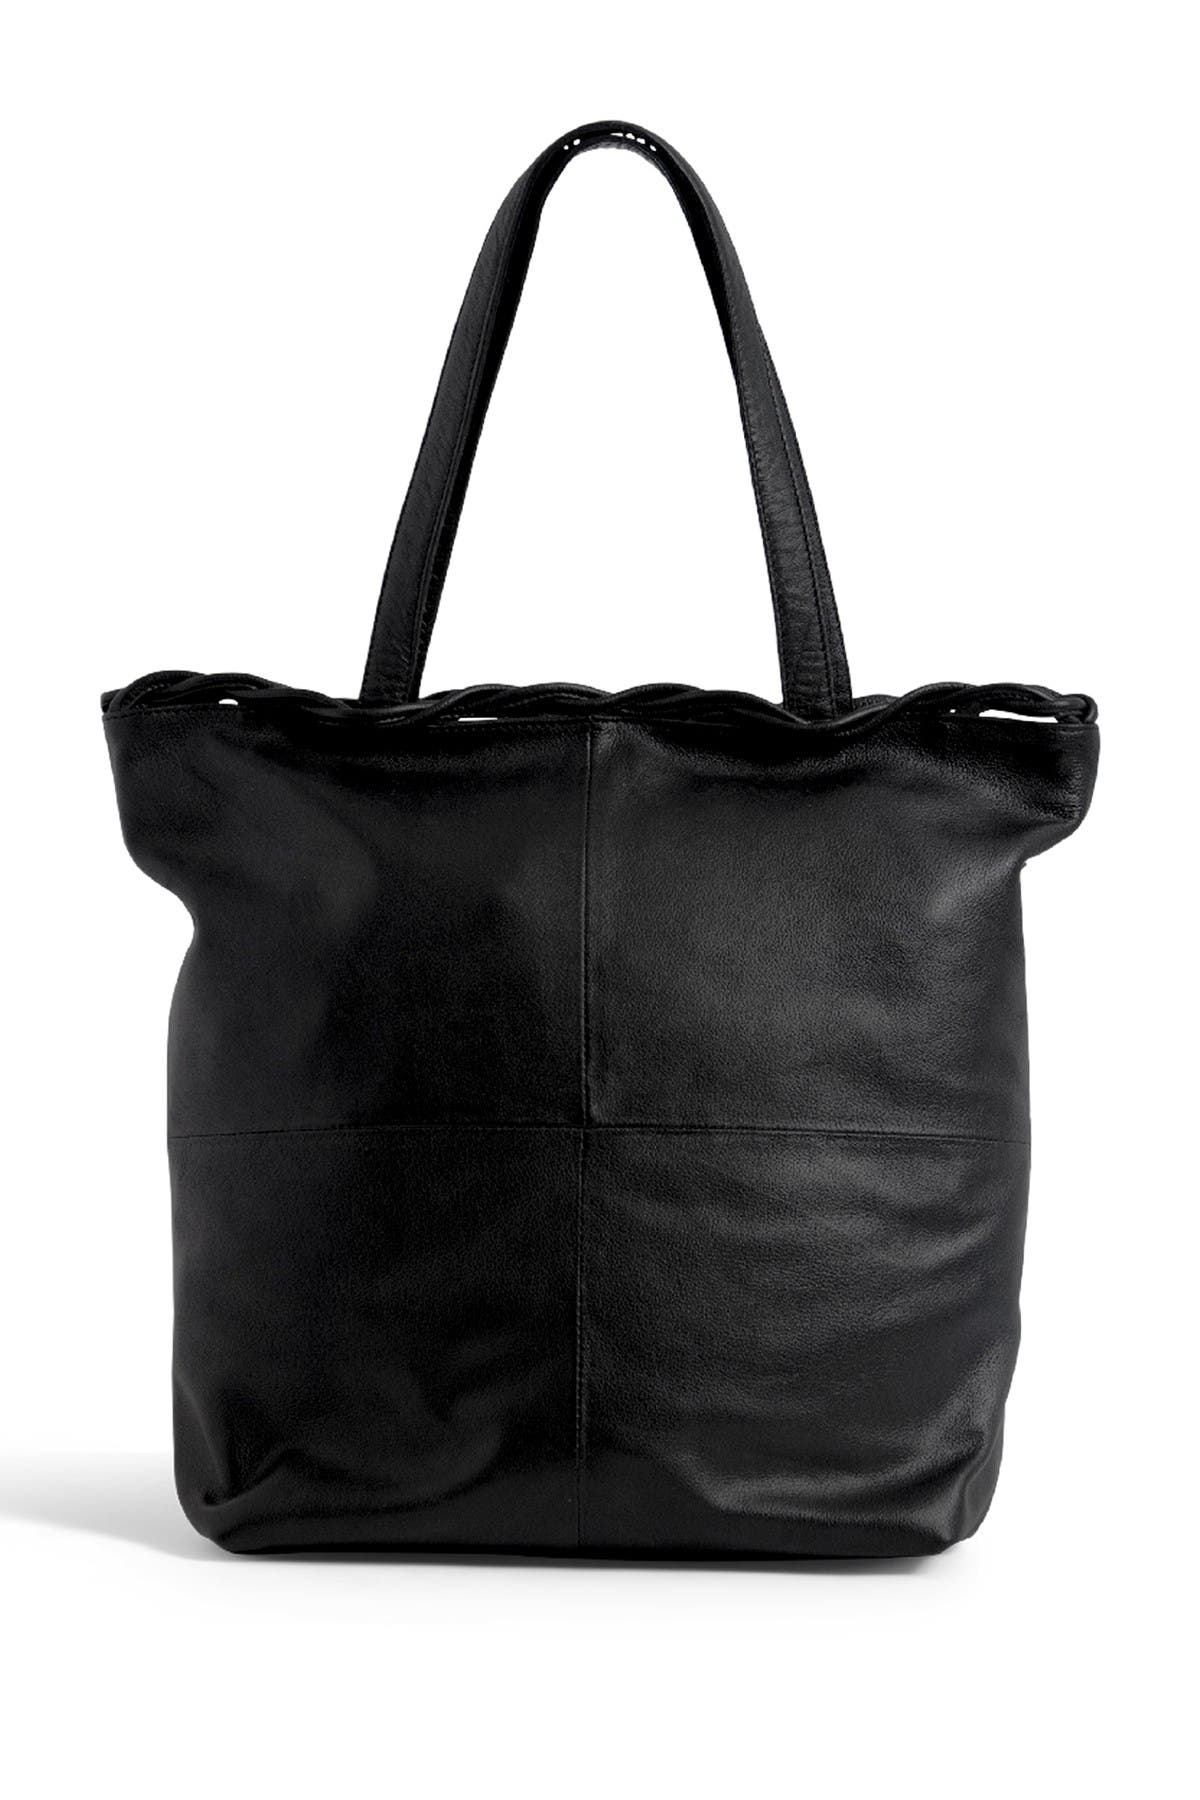 Day & Mood Fiona Tote Bag In Black